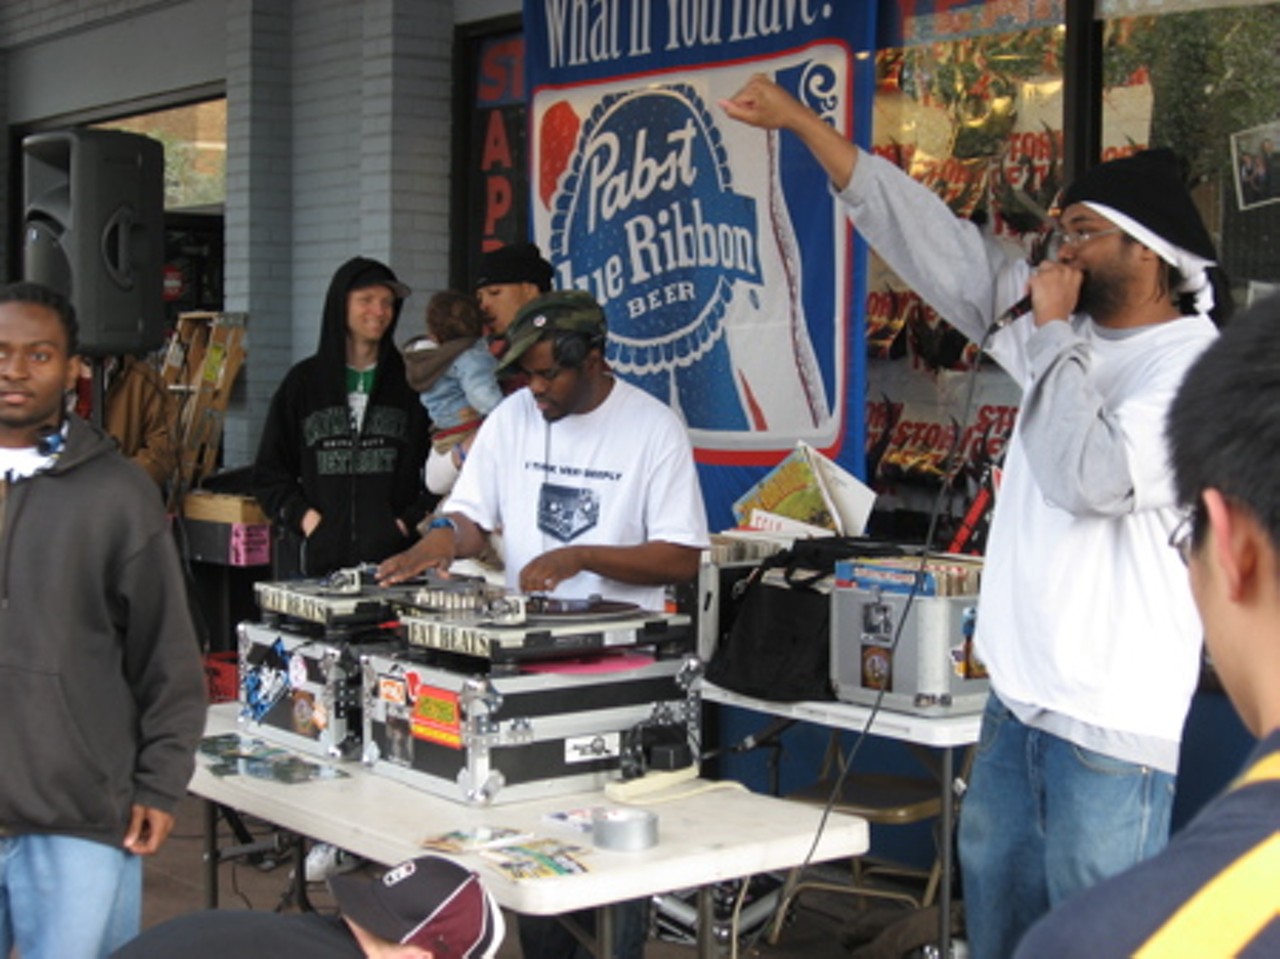 National Record Store Day at Vintage Vinyl in St. Louis, April 19, 2008